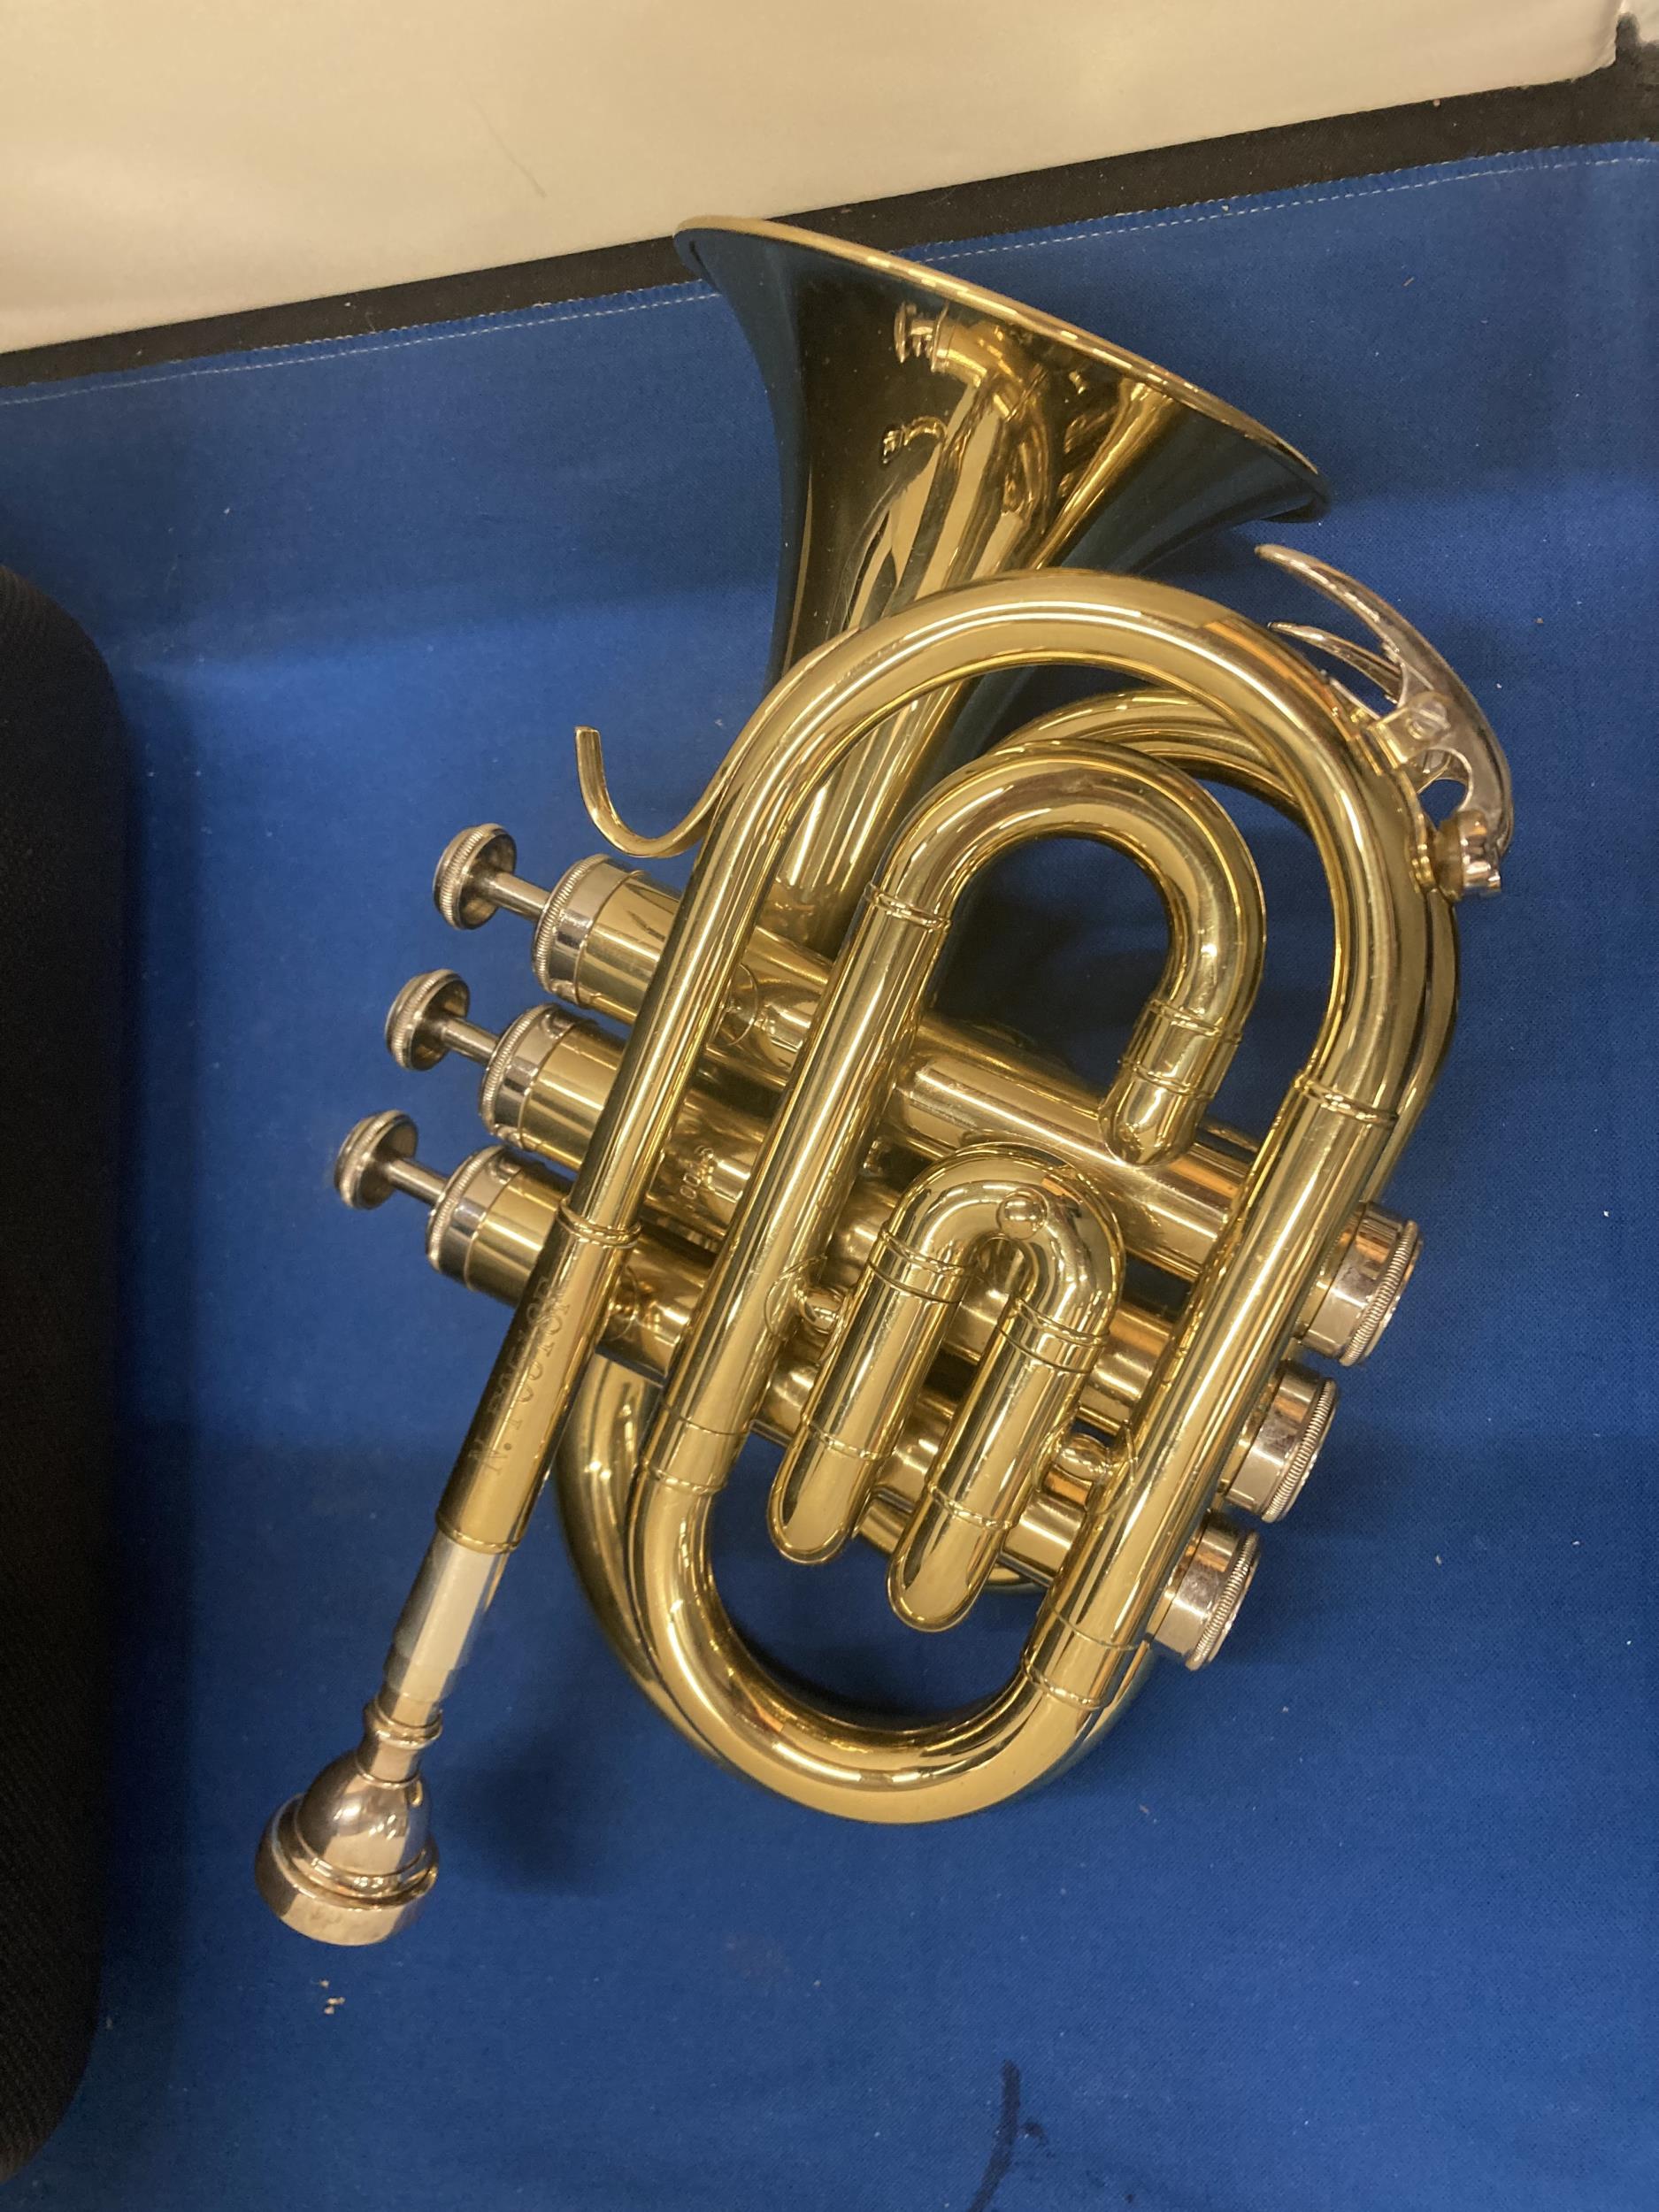 A JOHN SCHEERER & SON PRIMO POCKET TRUMPET WITH CASE - Image 2 of 4